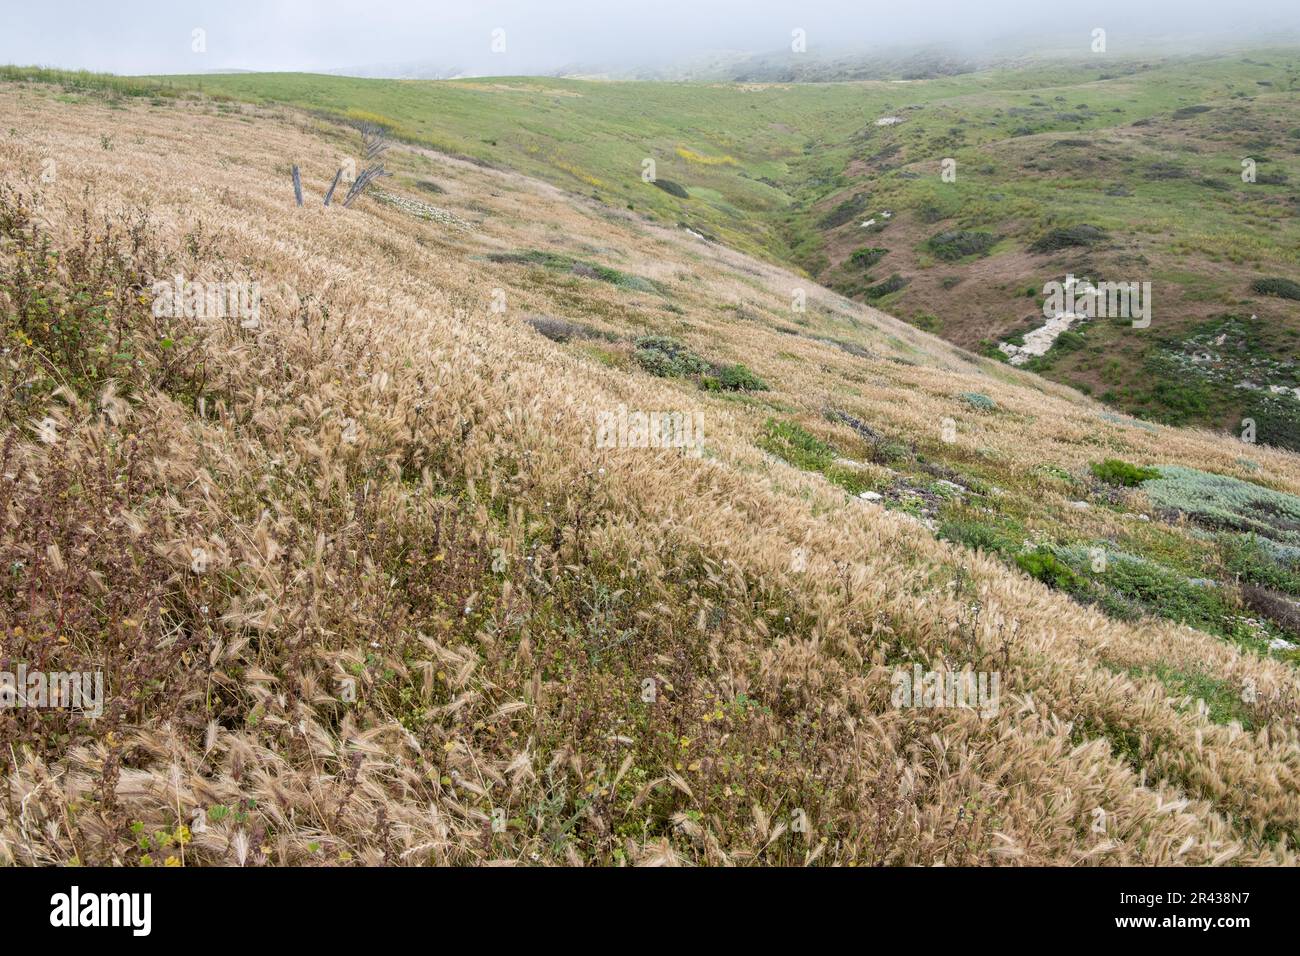 A landscape of the rolling hills and dry grassland of Santa Cruz island in Channel islands National Park, California. Stock Photo